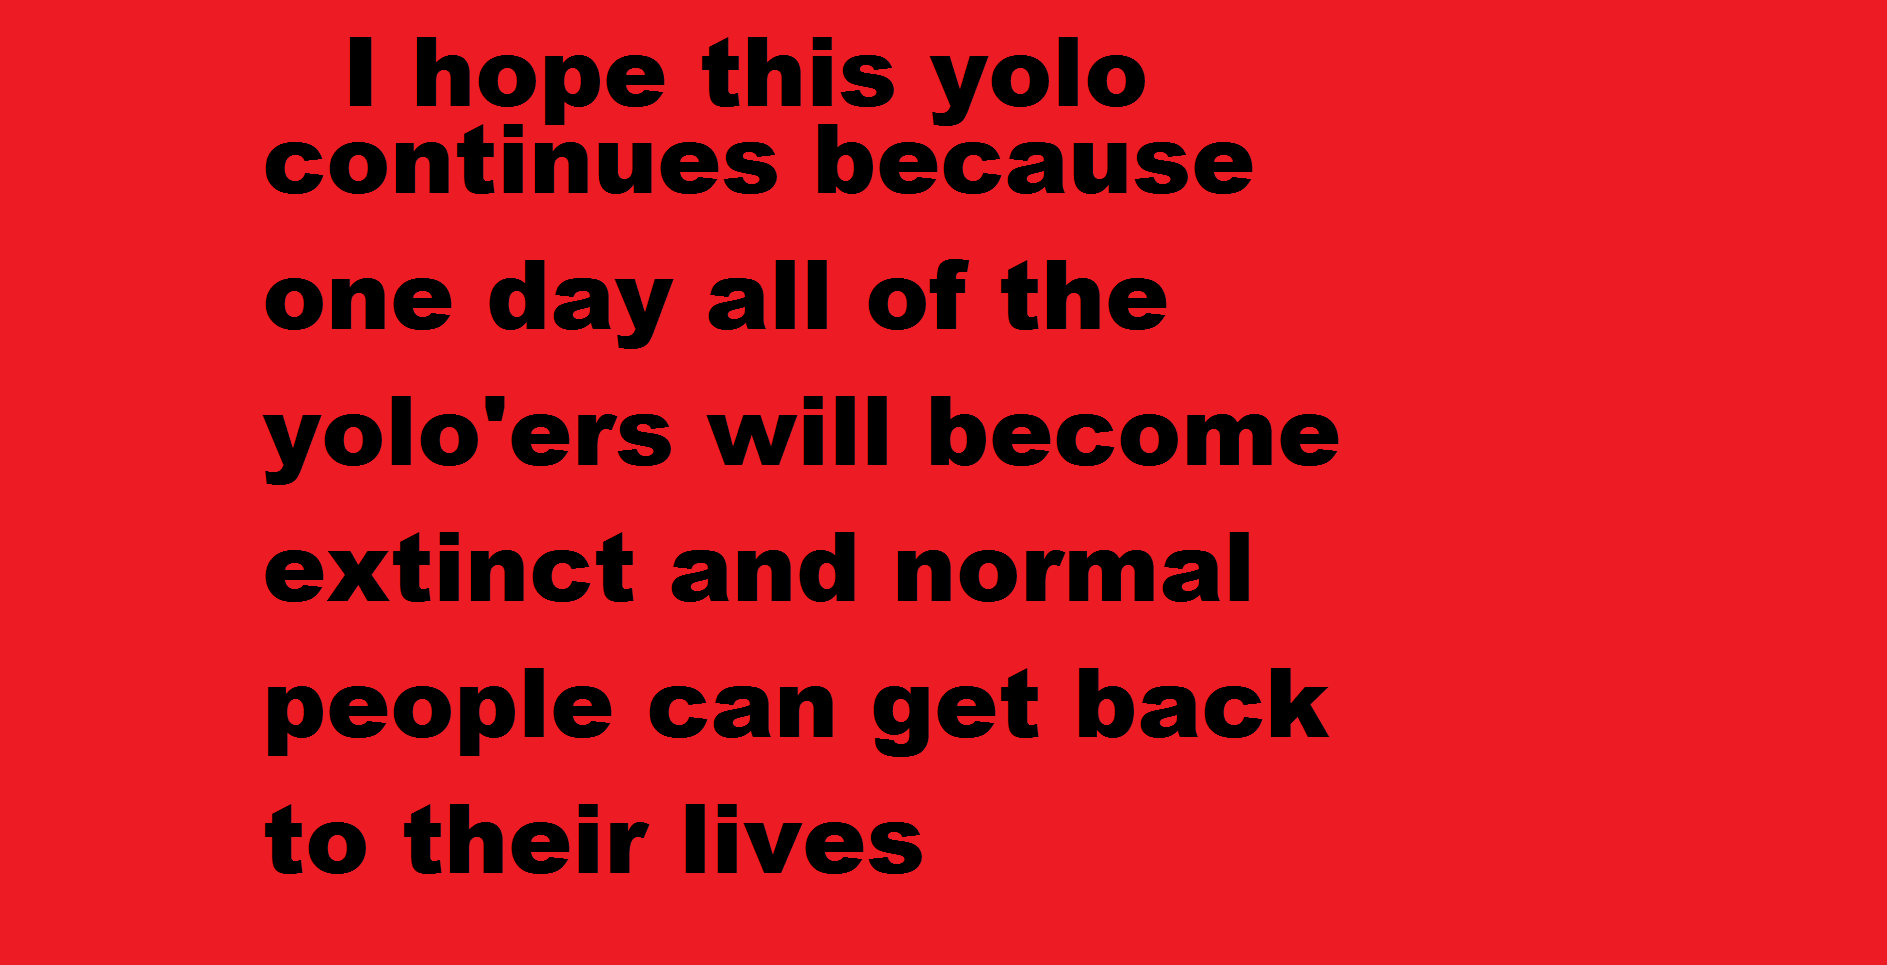 How YOLO will die out. Nothing to say here. I hope this yolo continues because one day all of the yolo' ers will become extinct tand normal people (tmart get ba